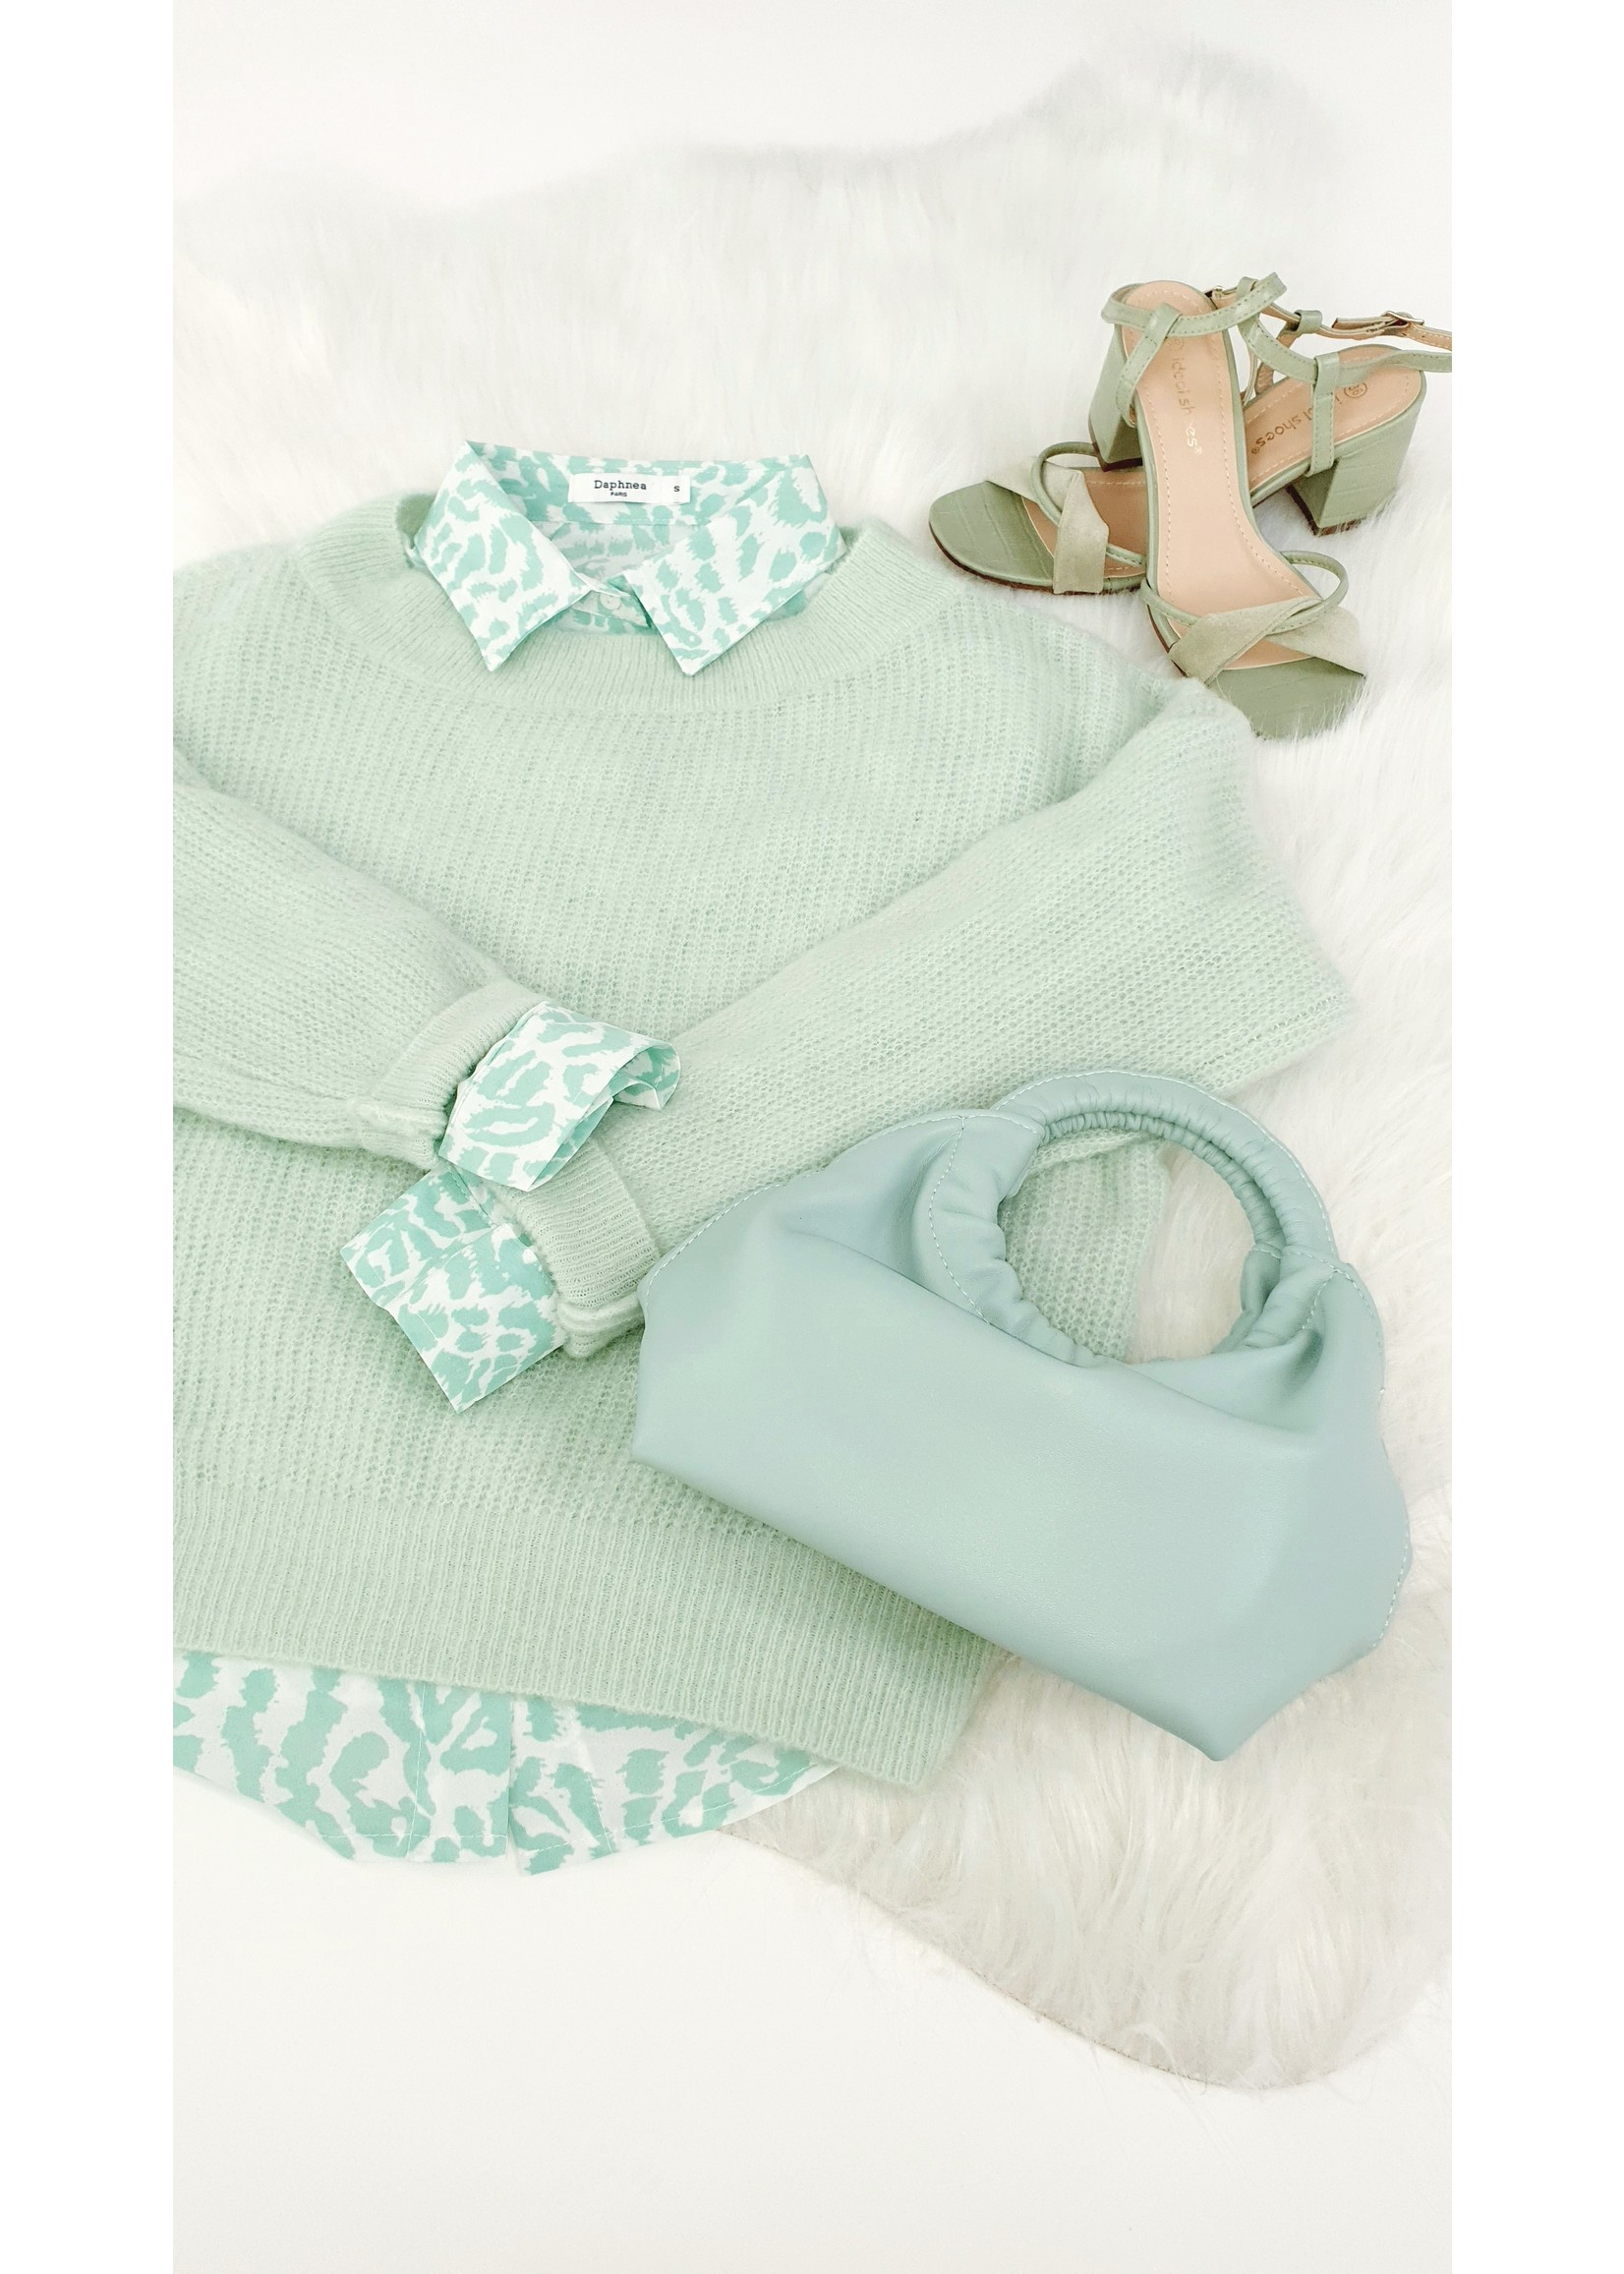 Mint and printed leopard